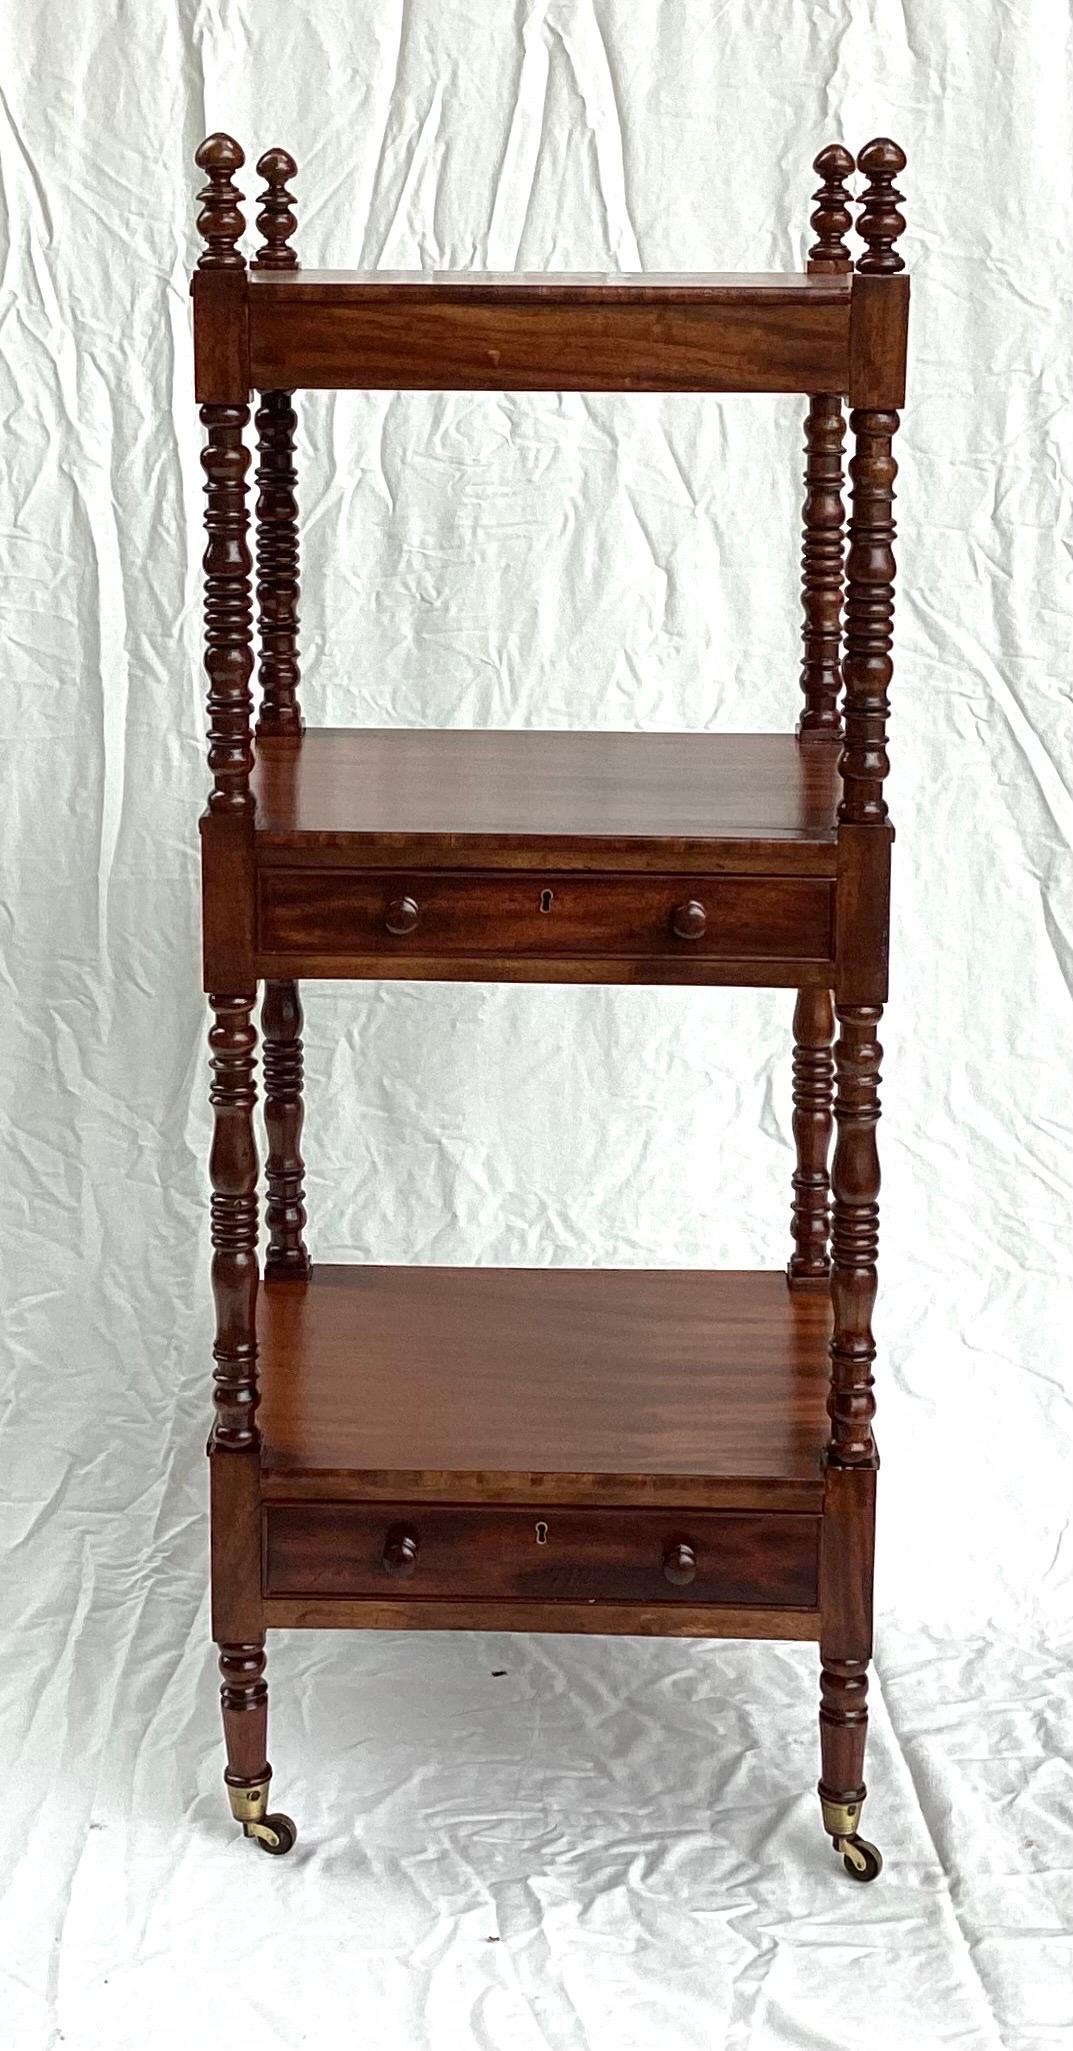 Antique English Mahogany What Not Shelf with Drawers. 42”tall to top of finials 16 wide by 14